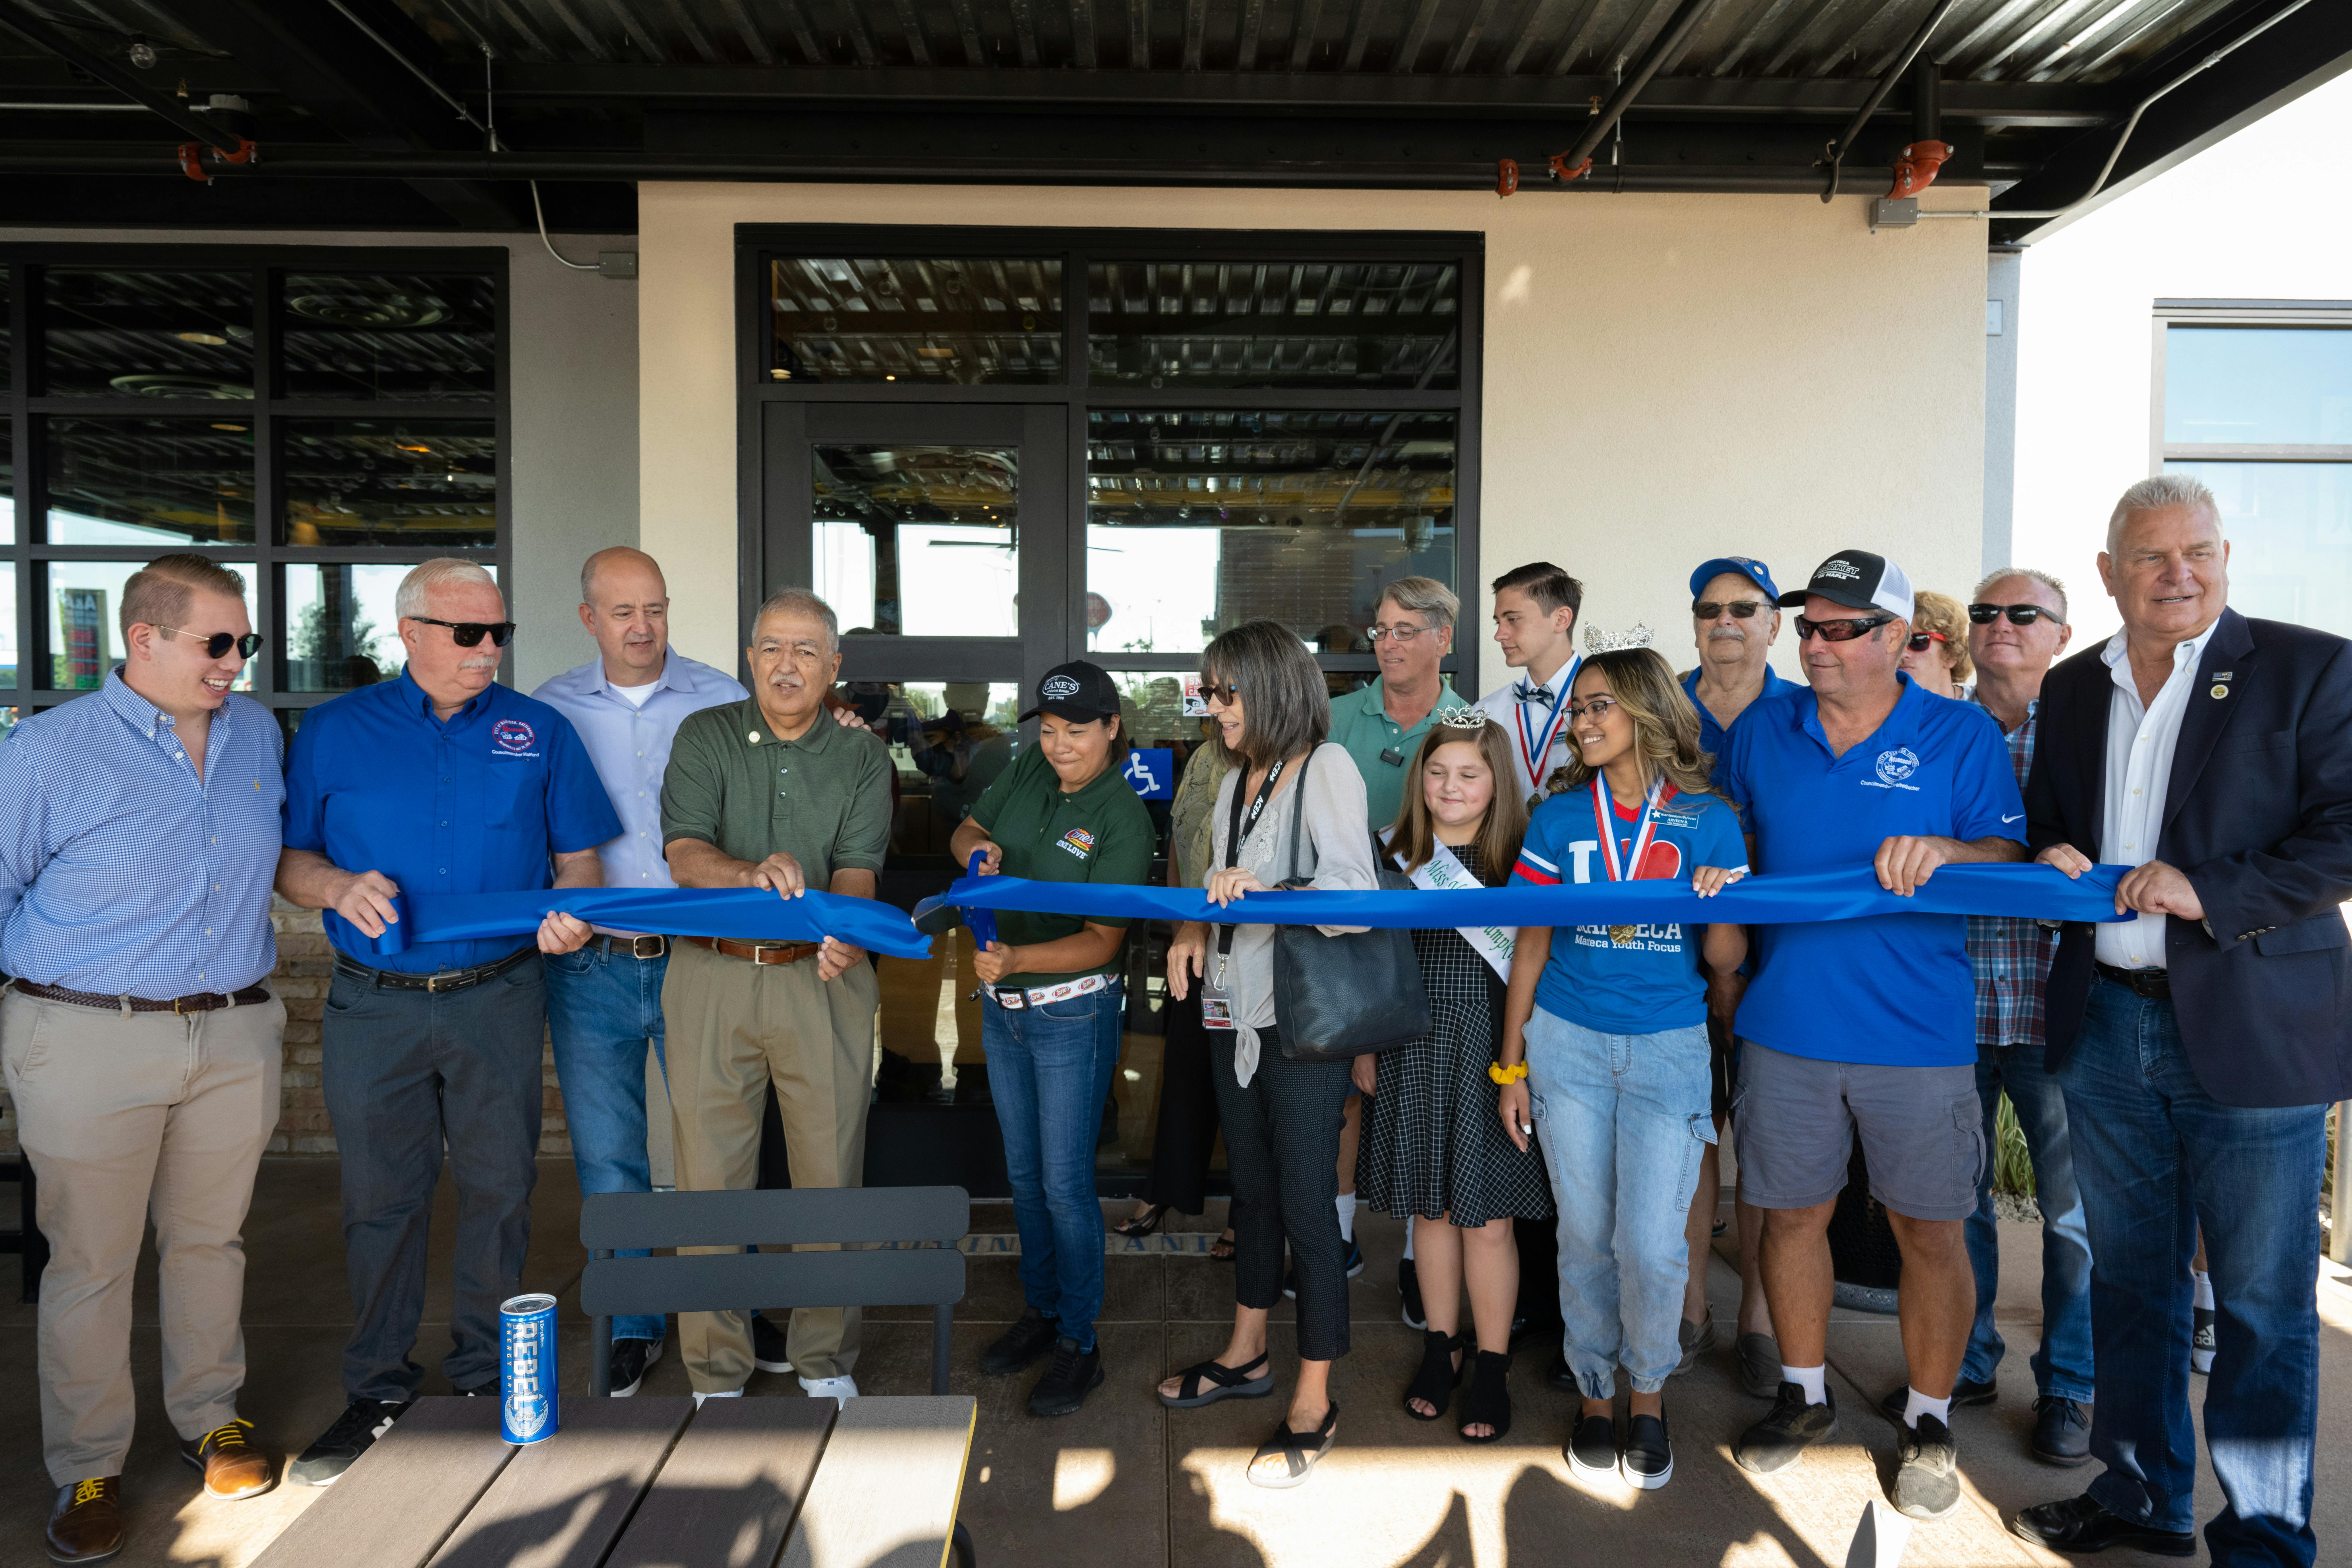 Ribbon cutting ceremony at the Restaurant